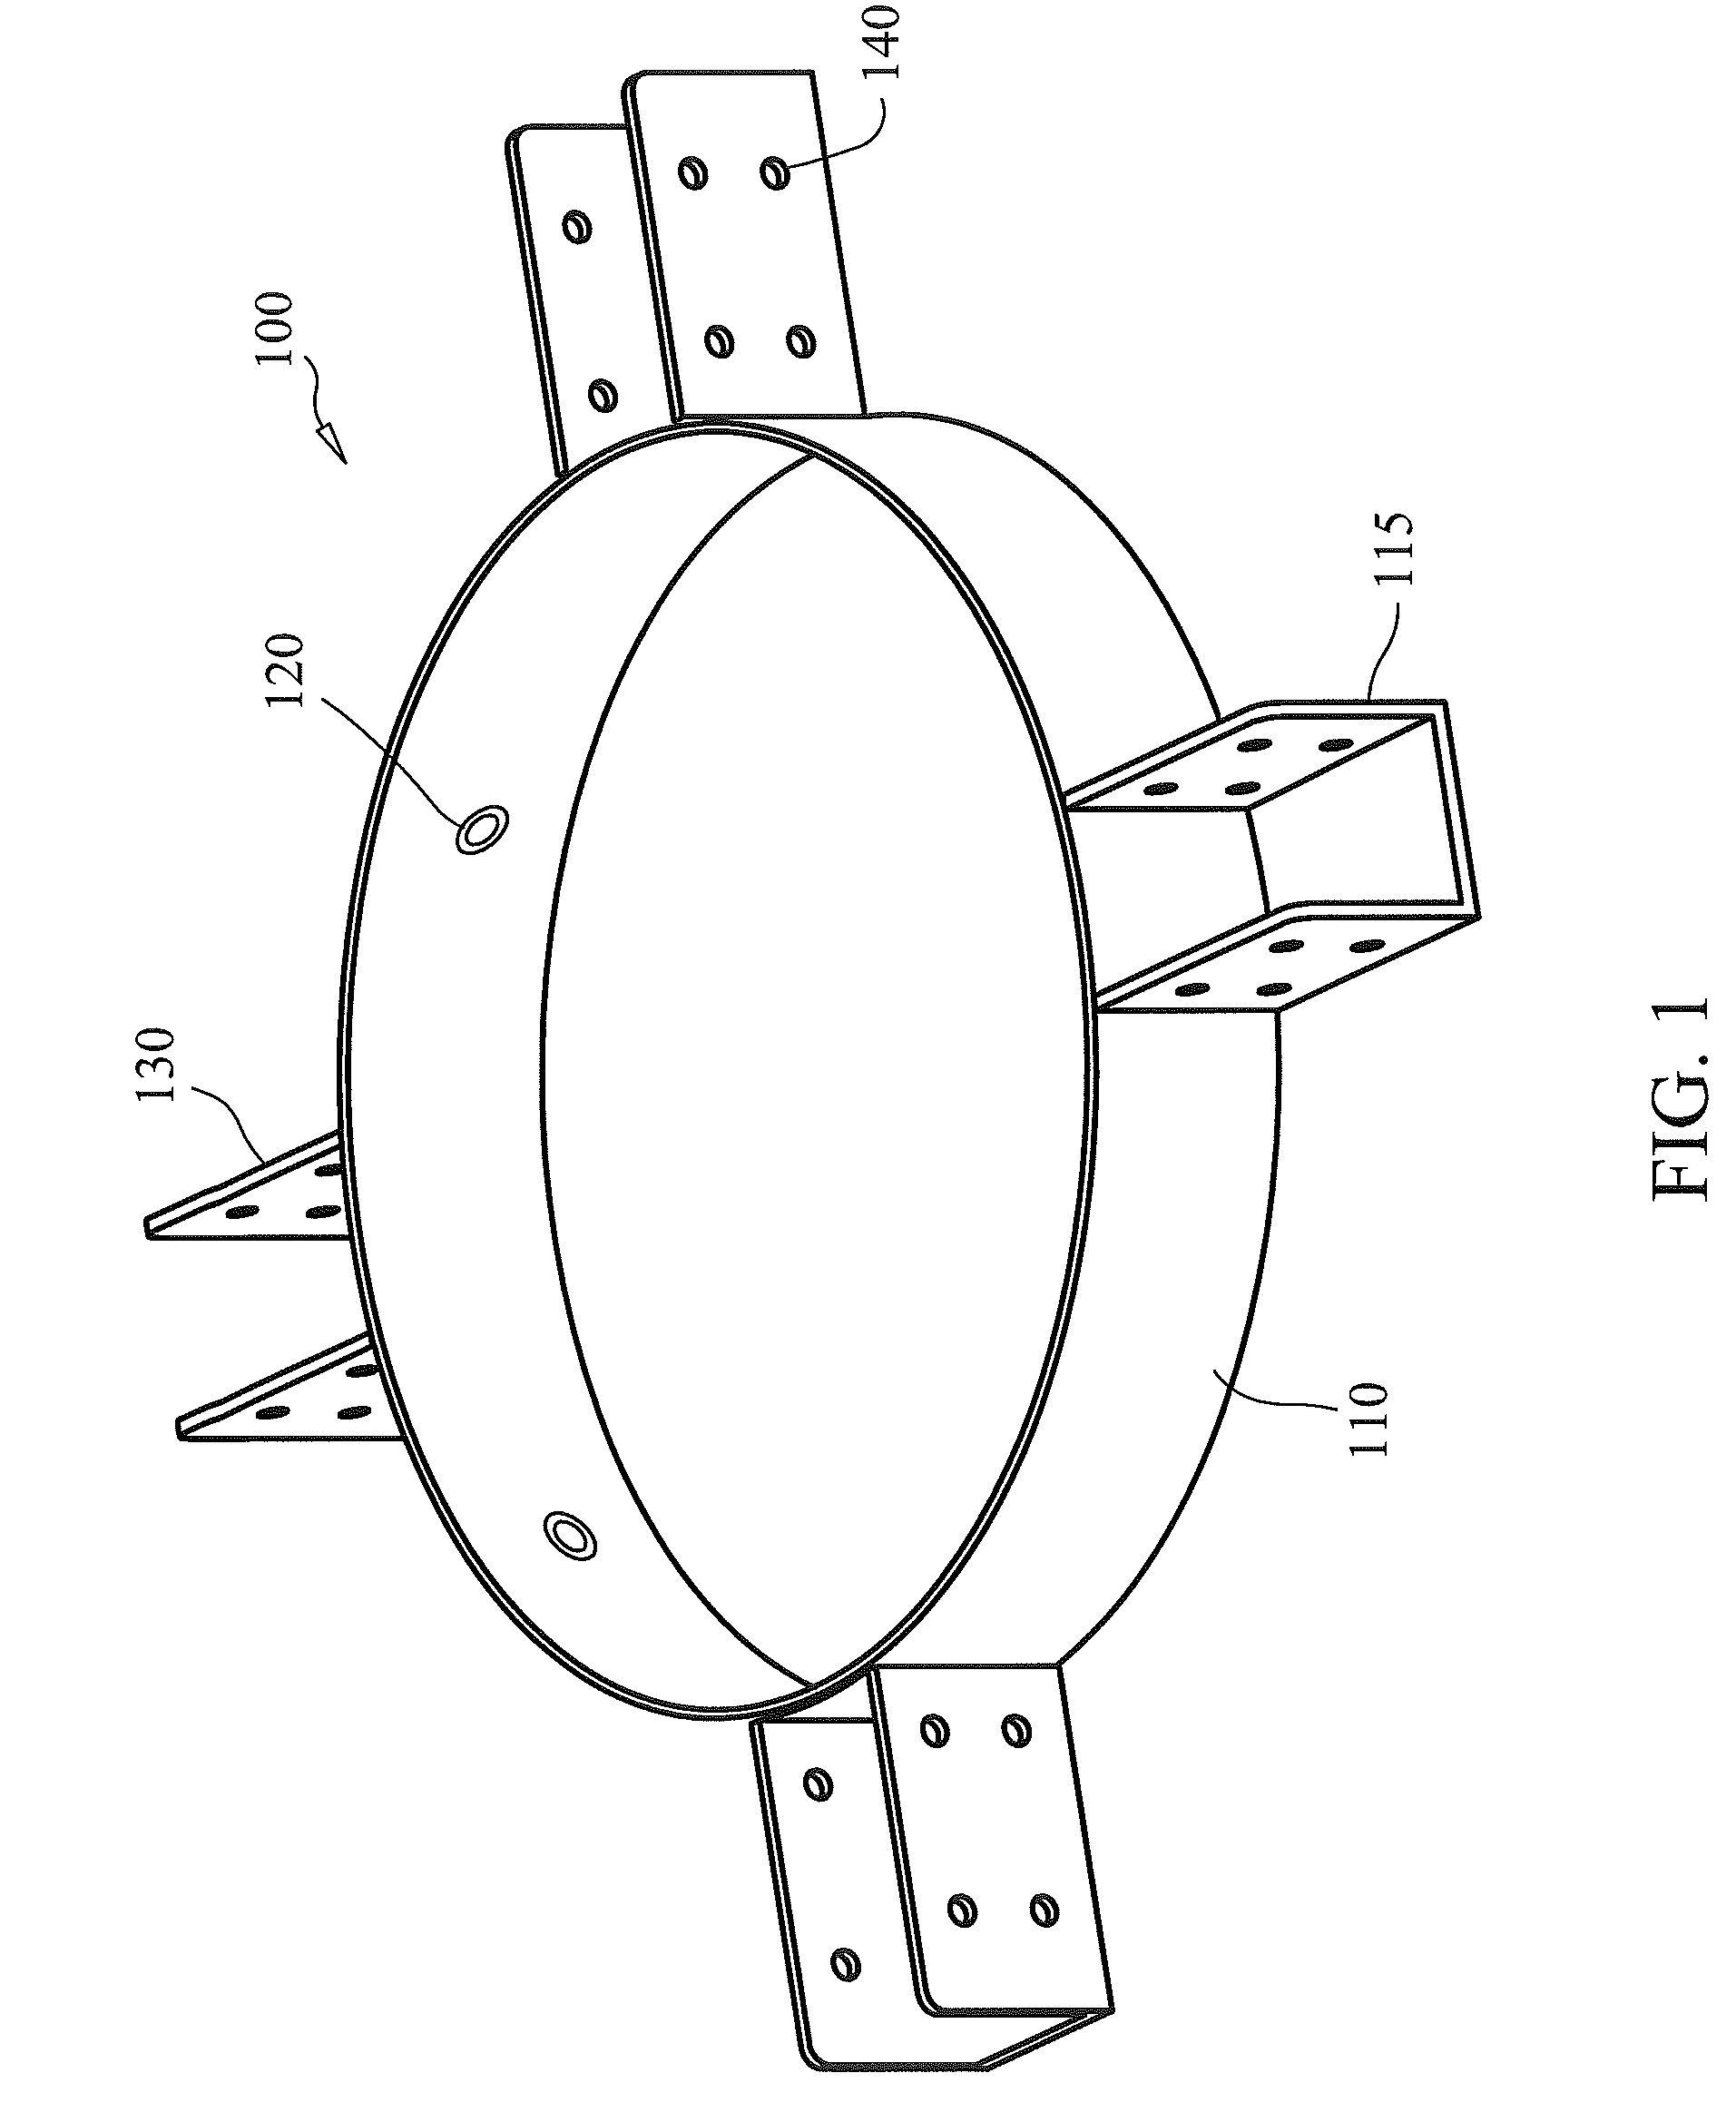 Concrete form alignment tool and method of use